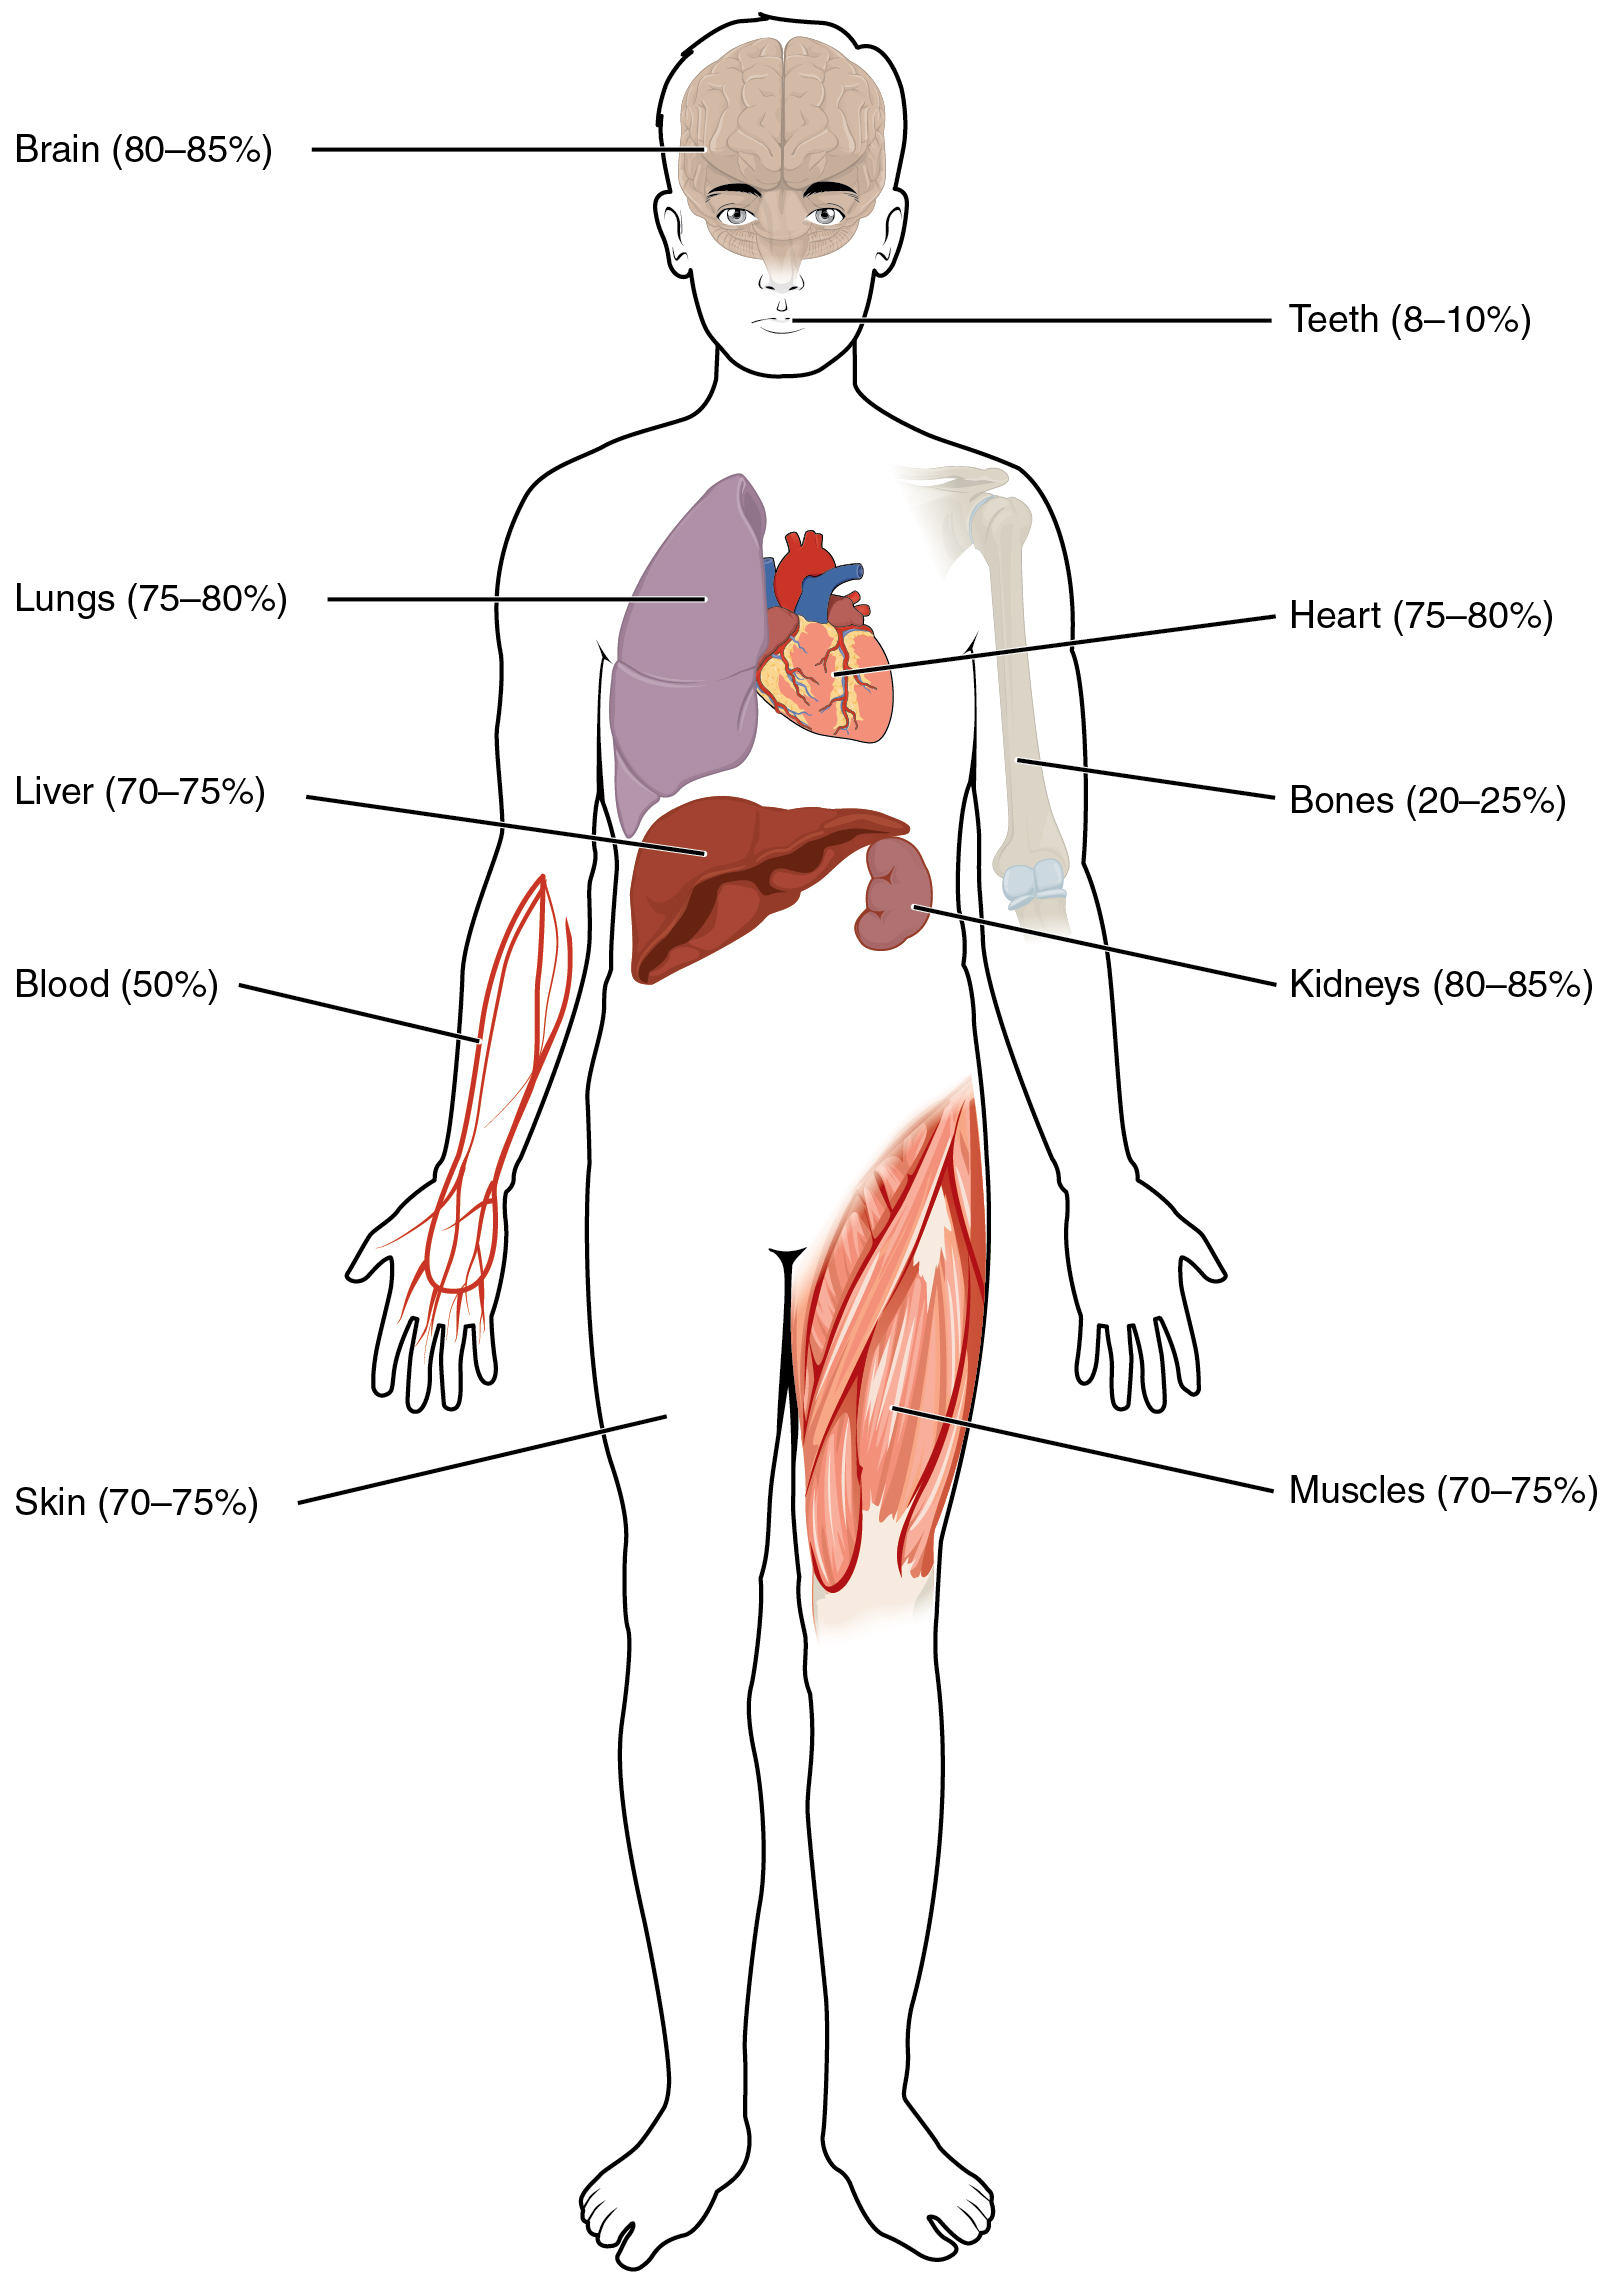 Organs and water content in the body.